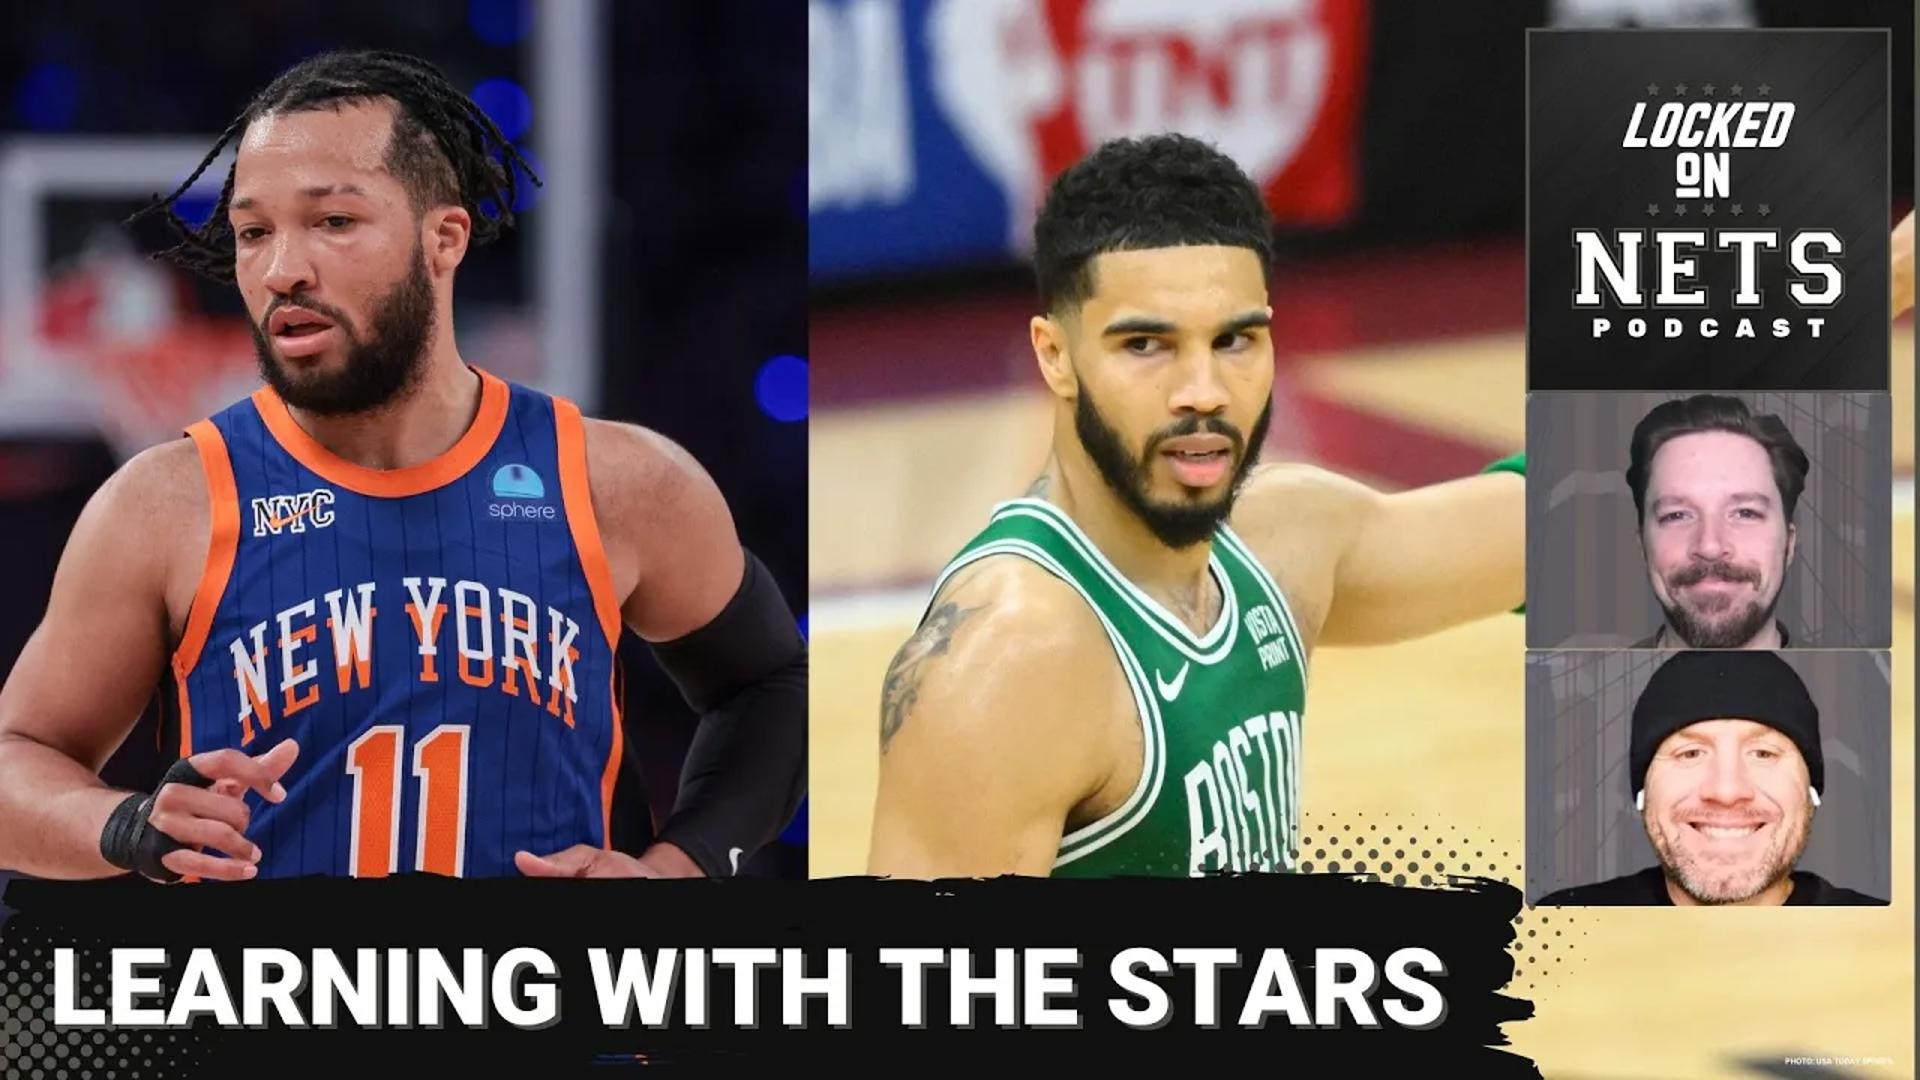 With the playoffs marching on, there are stars shaping the league right now that could show the Brooklyn Nets a clear path going forward.